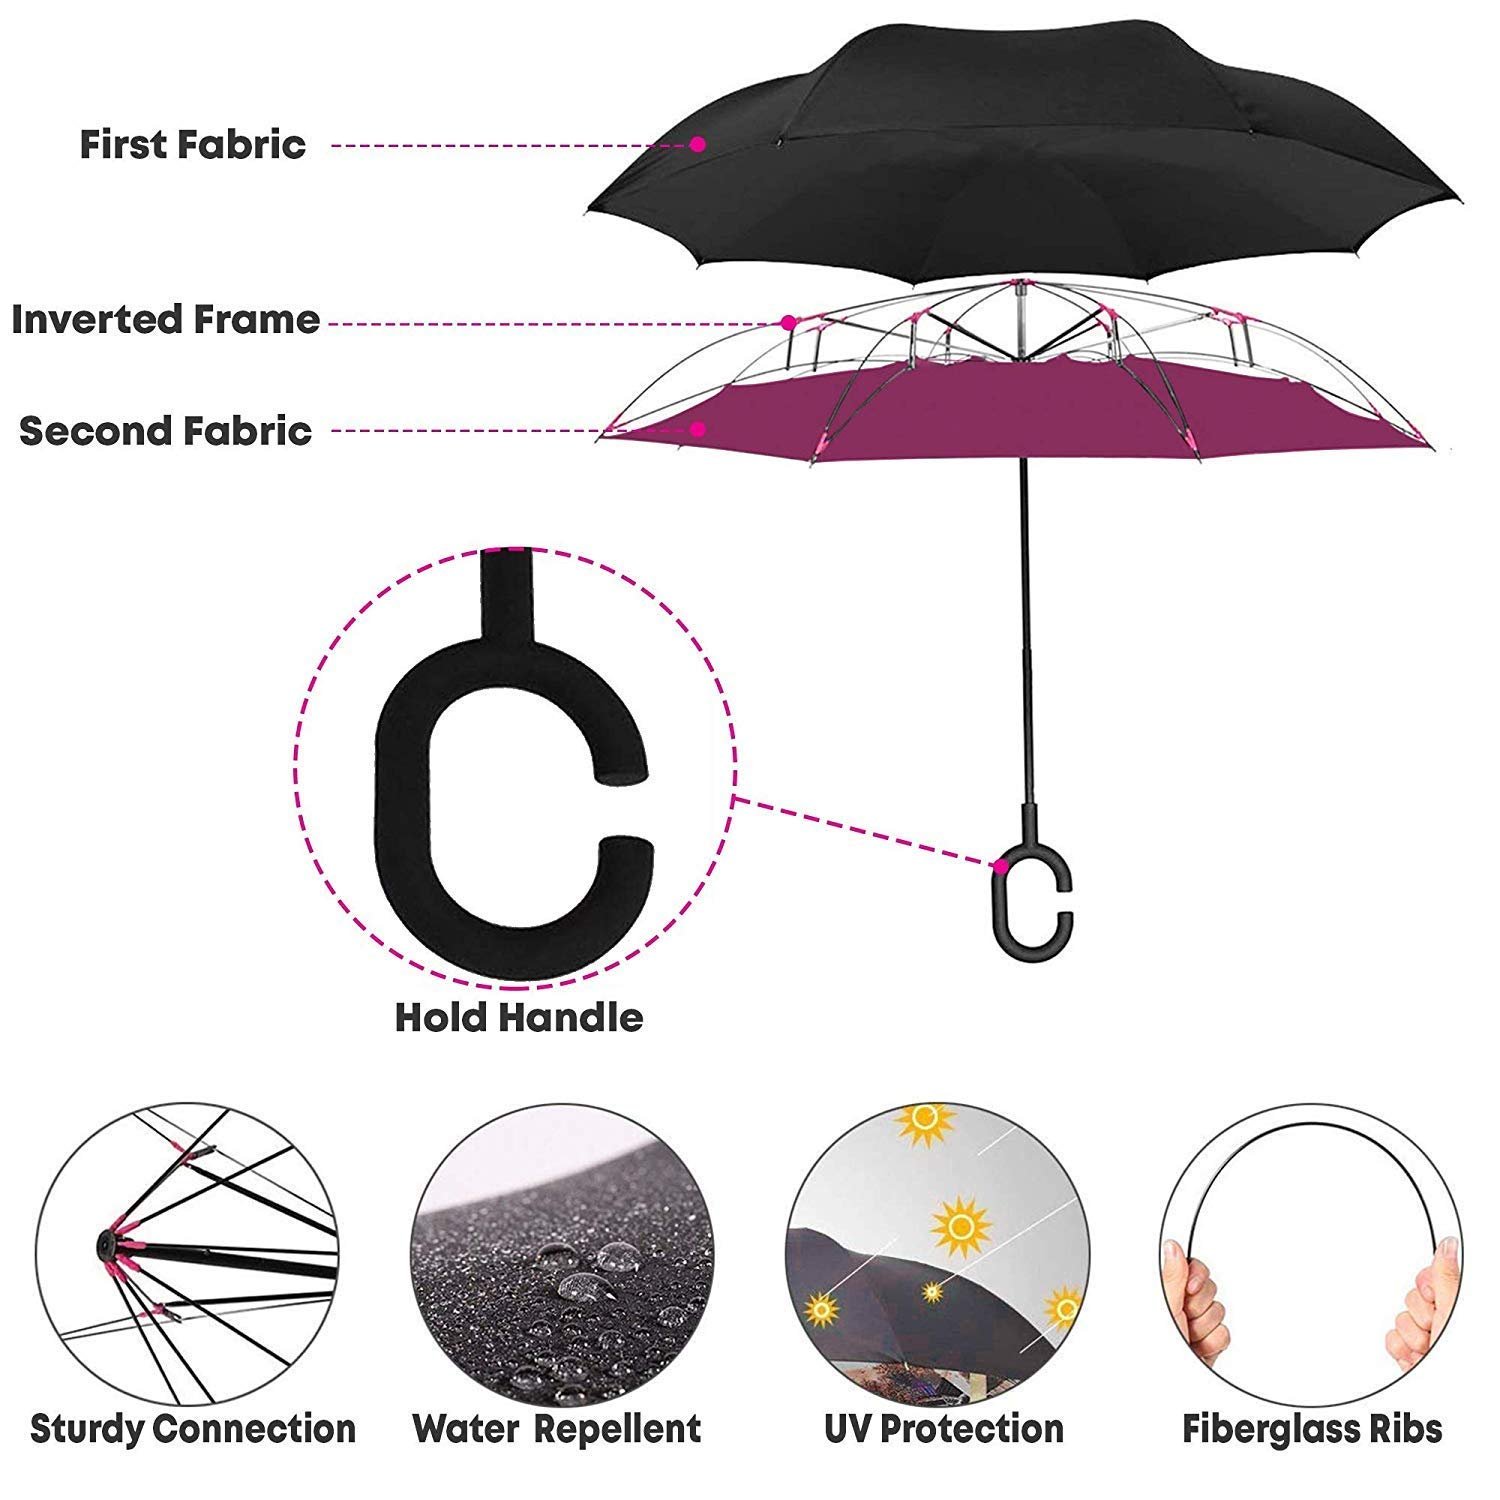 Double cloth laser and c handle in umbrella